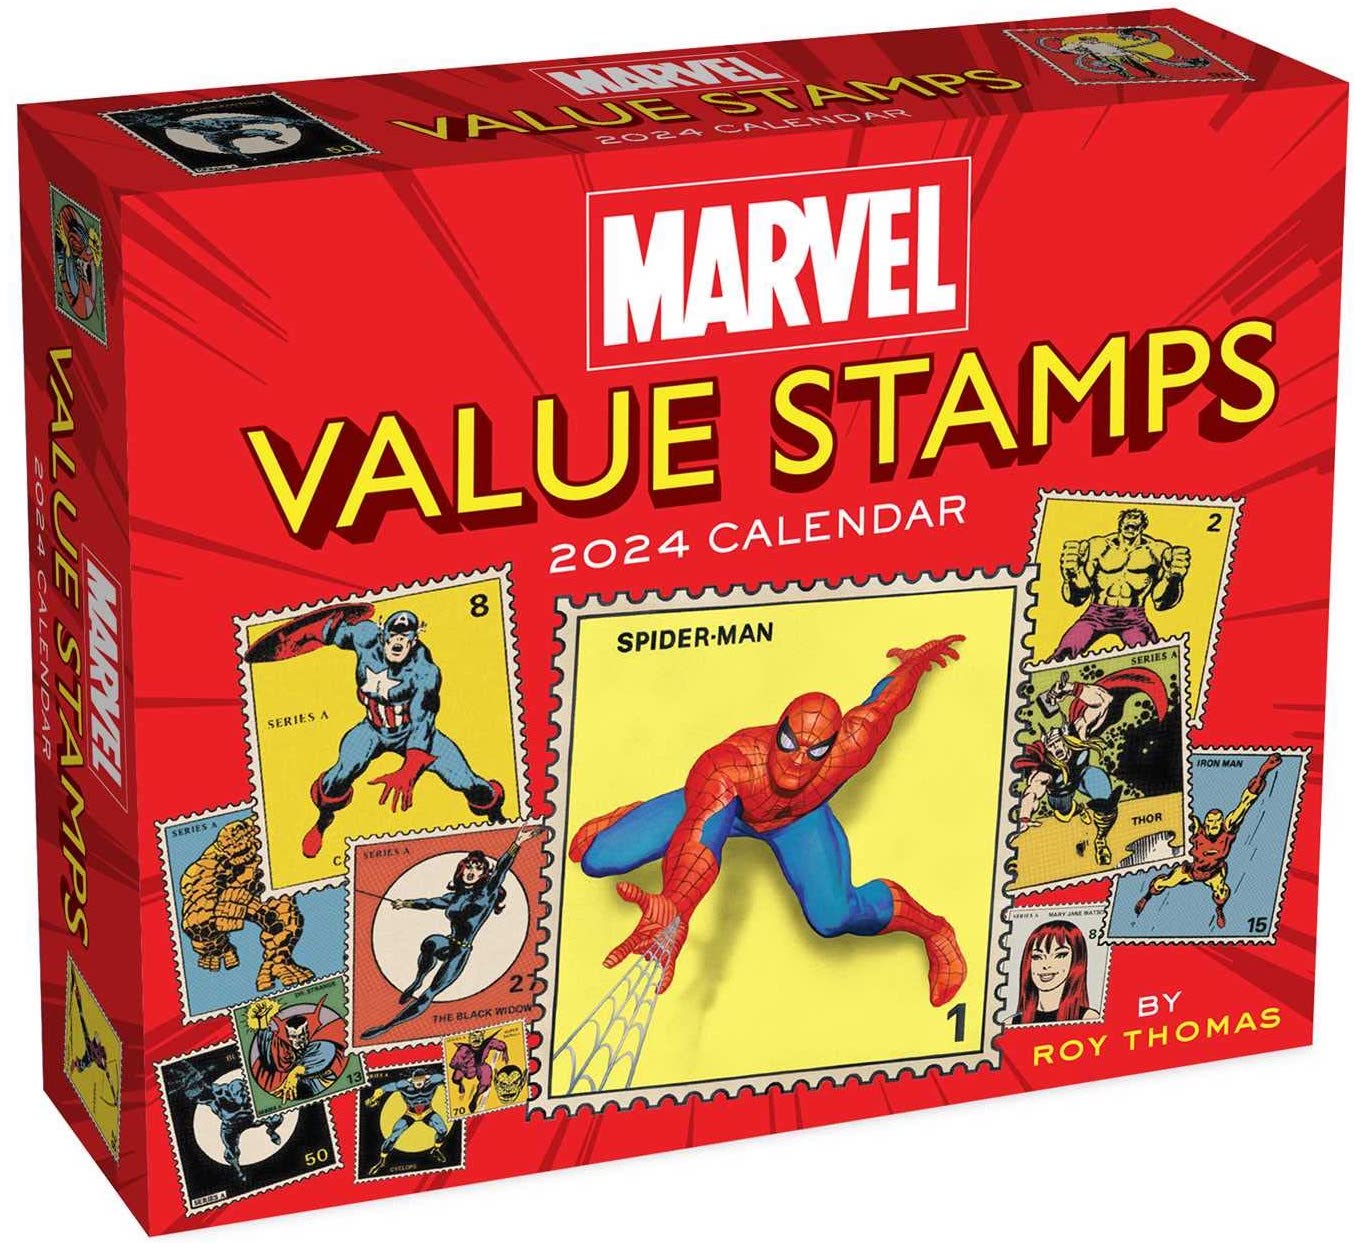 Dig This INSIDE LOOK at the 2024 MARVEL VALUE STAMPS CALENDAR 13th